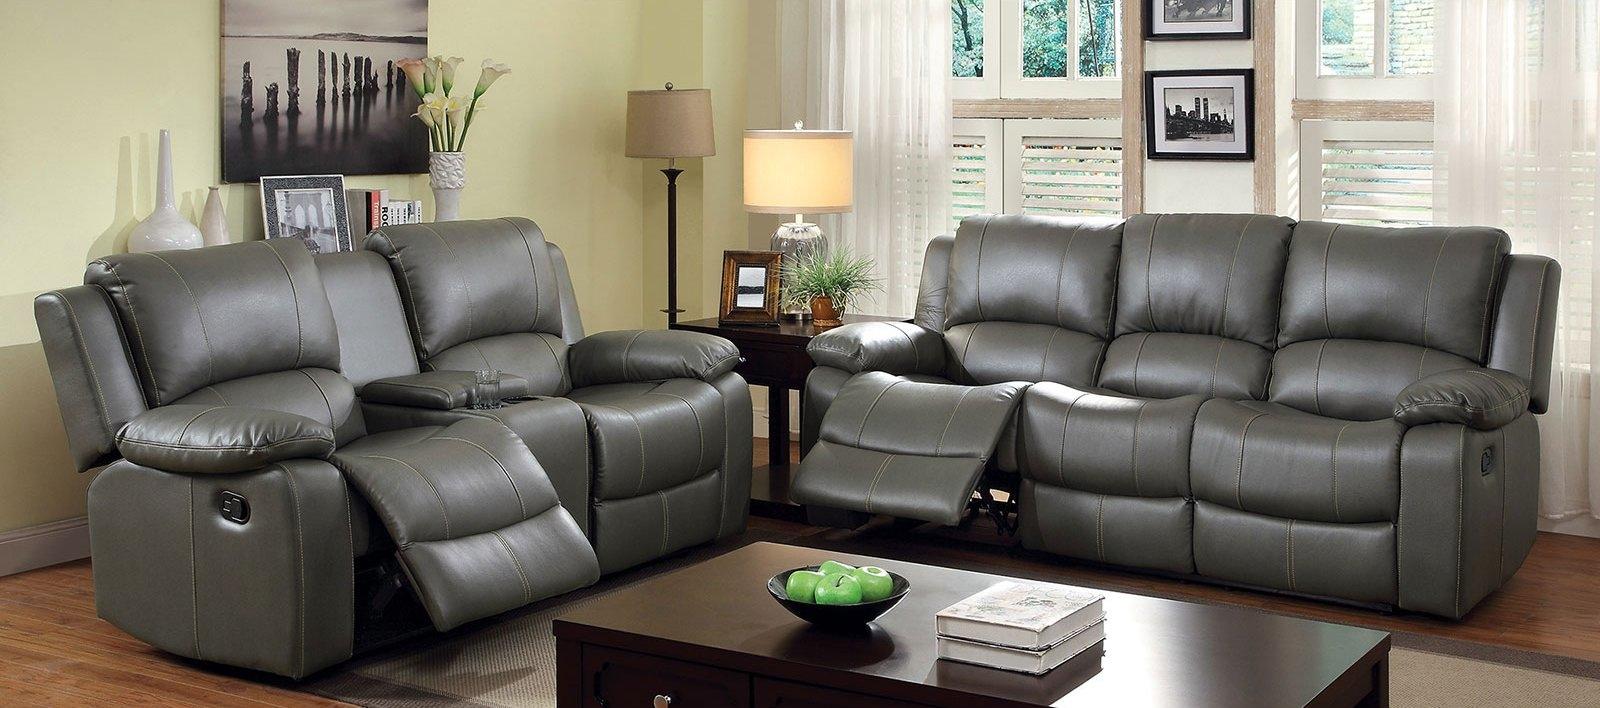 Transitional Recliner Sofa and Loveseat CM6326-2PC Sarles CM6326-2PC in Gray Bonded Leather